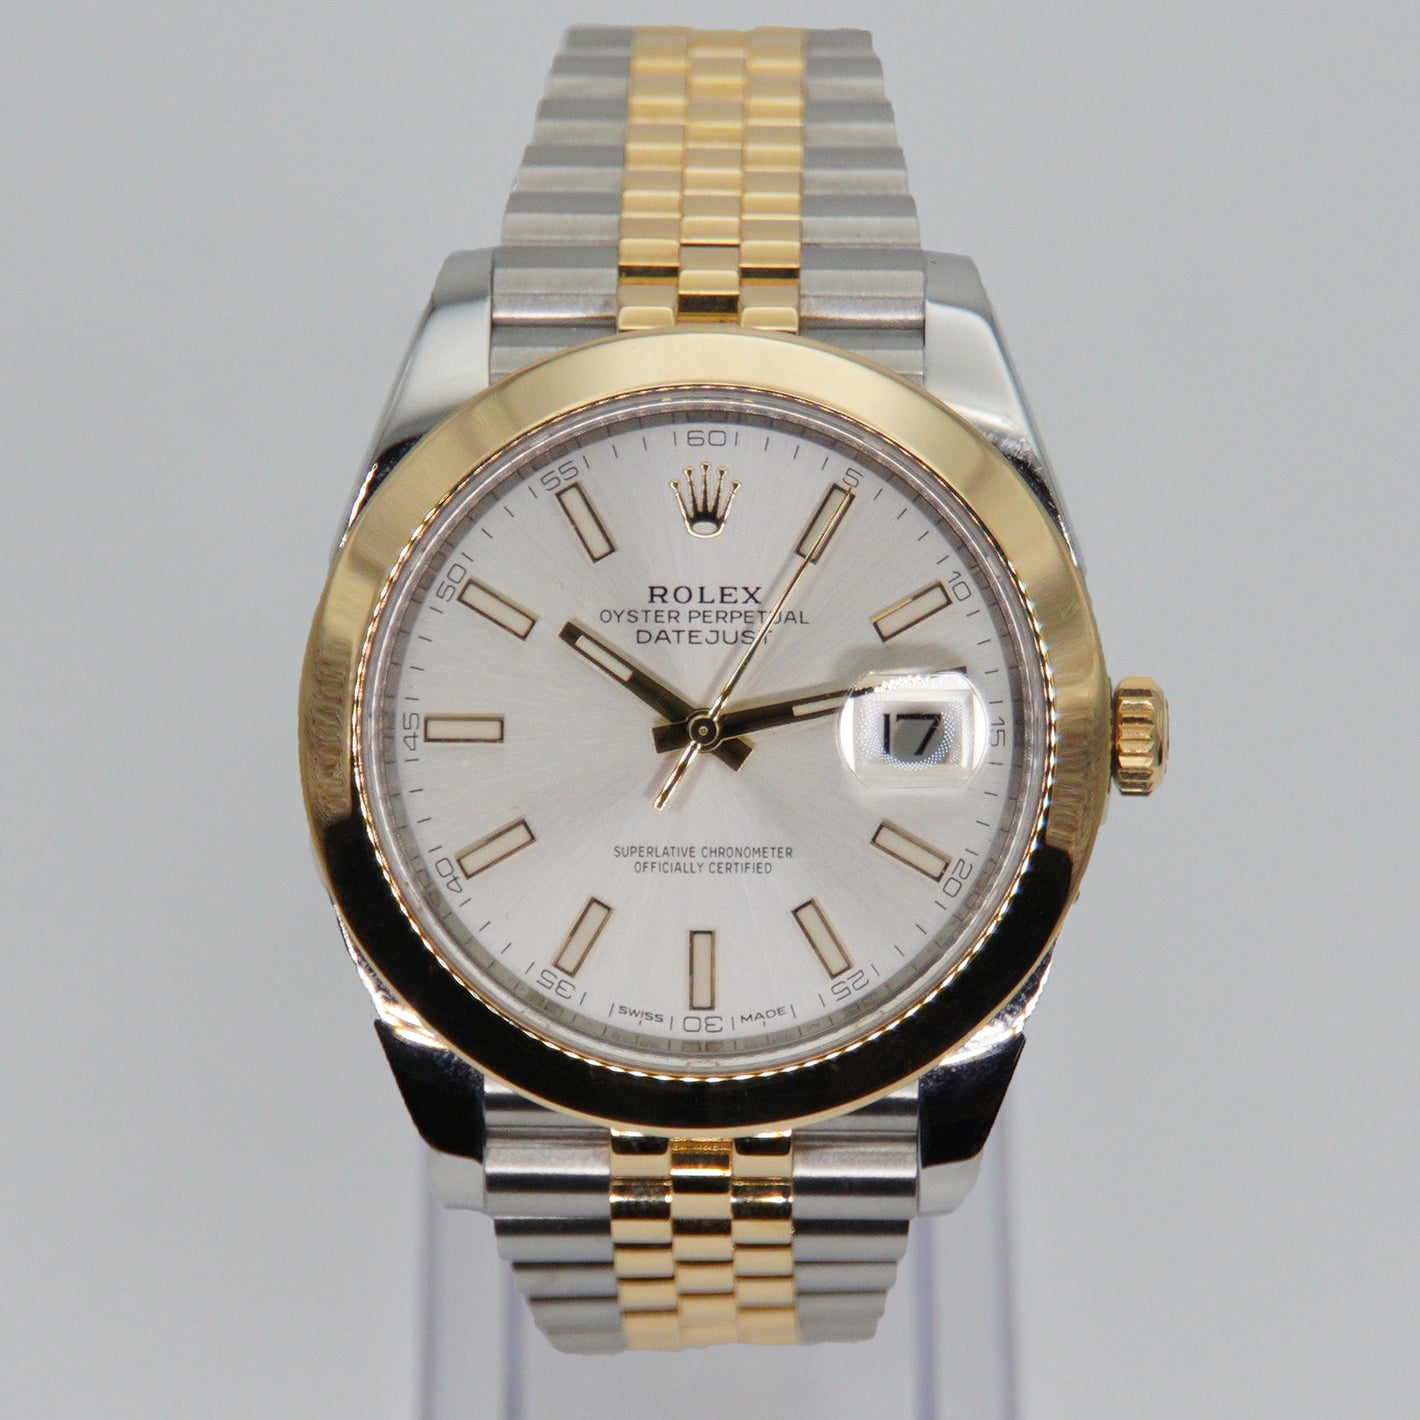 Rolex Datejust 41mm 126303 - 18k Gold & Stainless Steel - White Dial